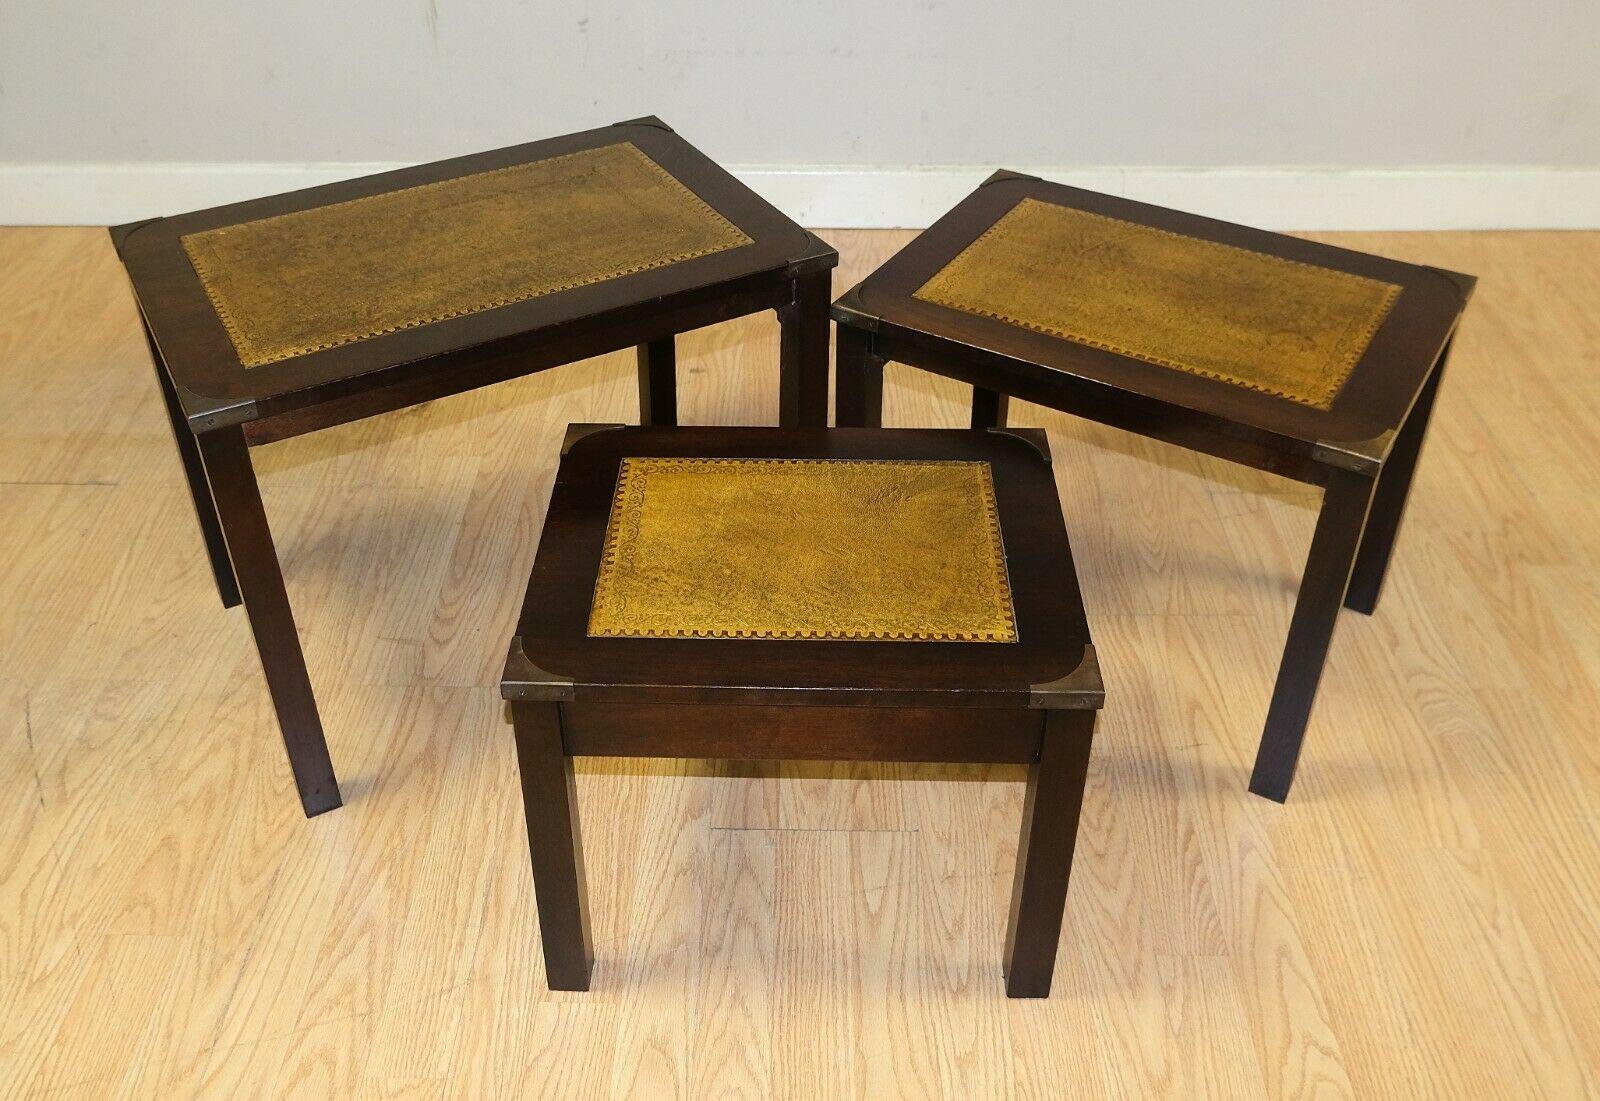 We are delighted to offer for sale these stunning Bevan Funell Mahogany campaign nest of tables.

The iconic Bevan Funnell brand is the ideal quality craft makers with its lovely design. The tables are presented with quality leather top and gold